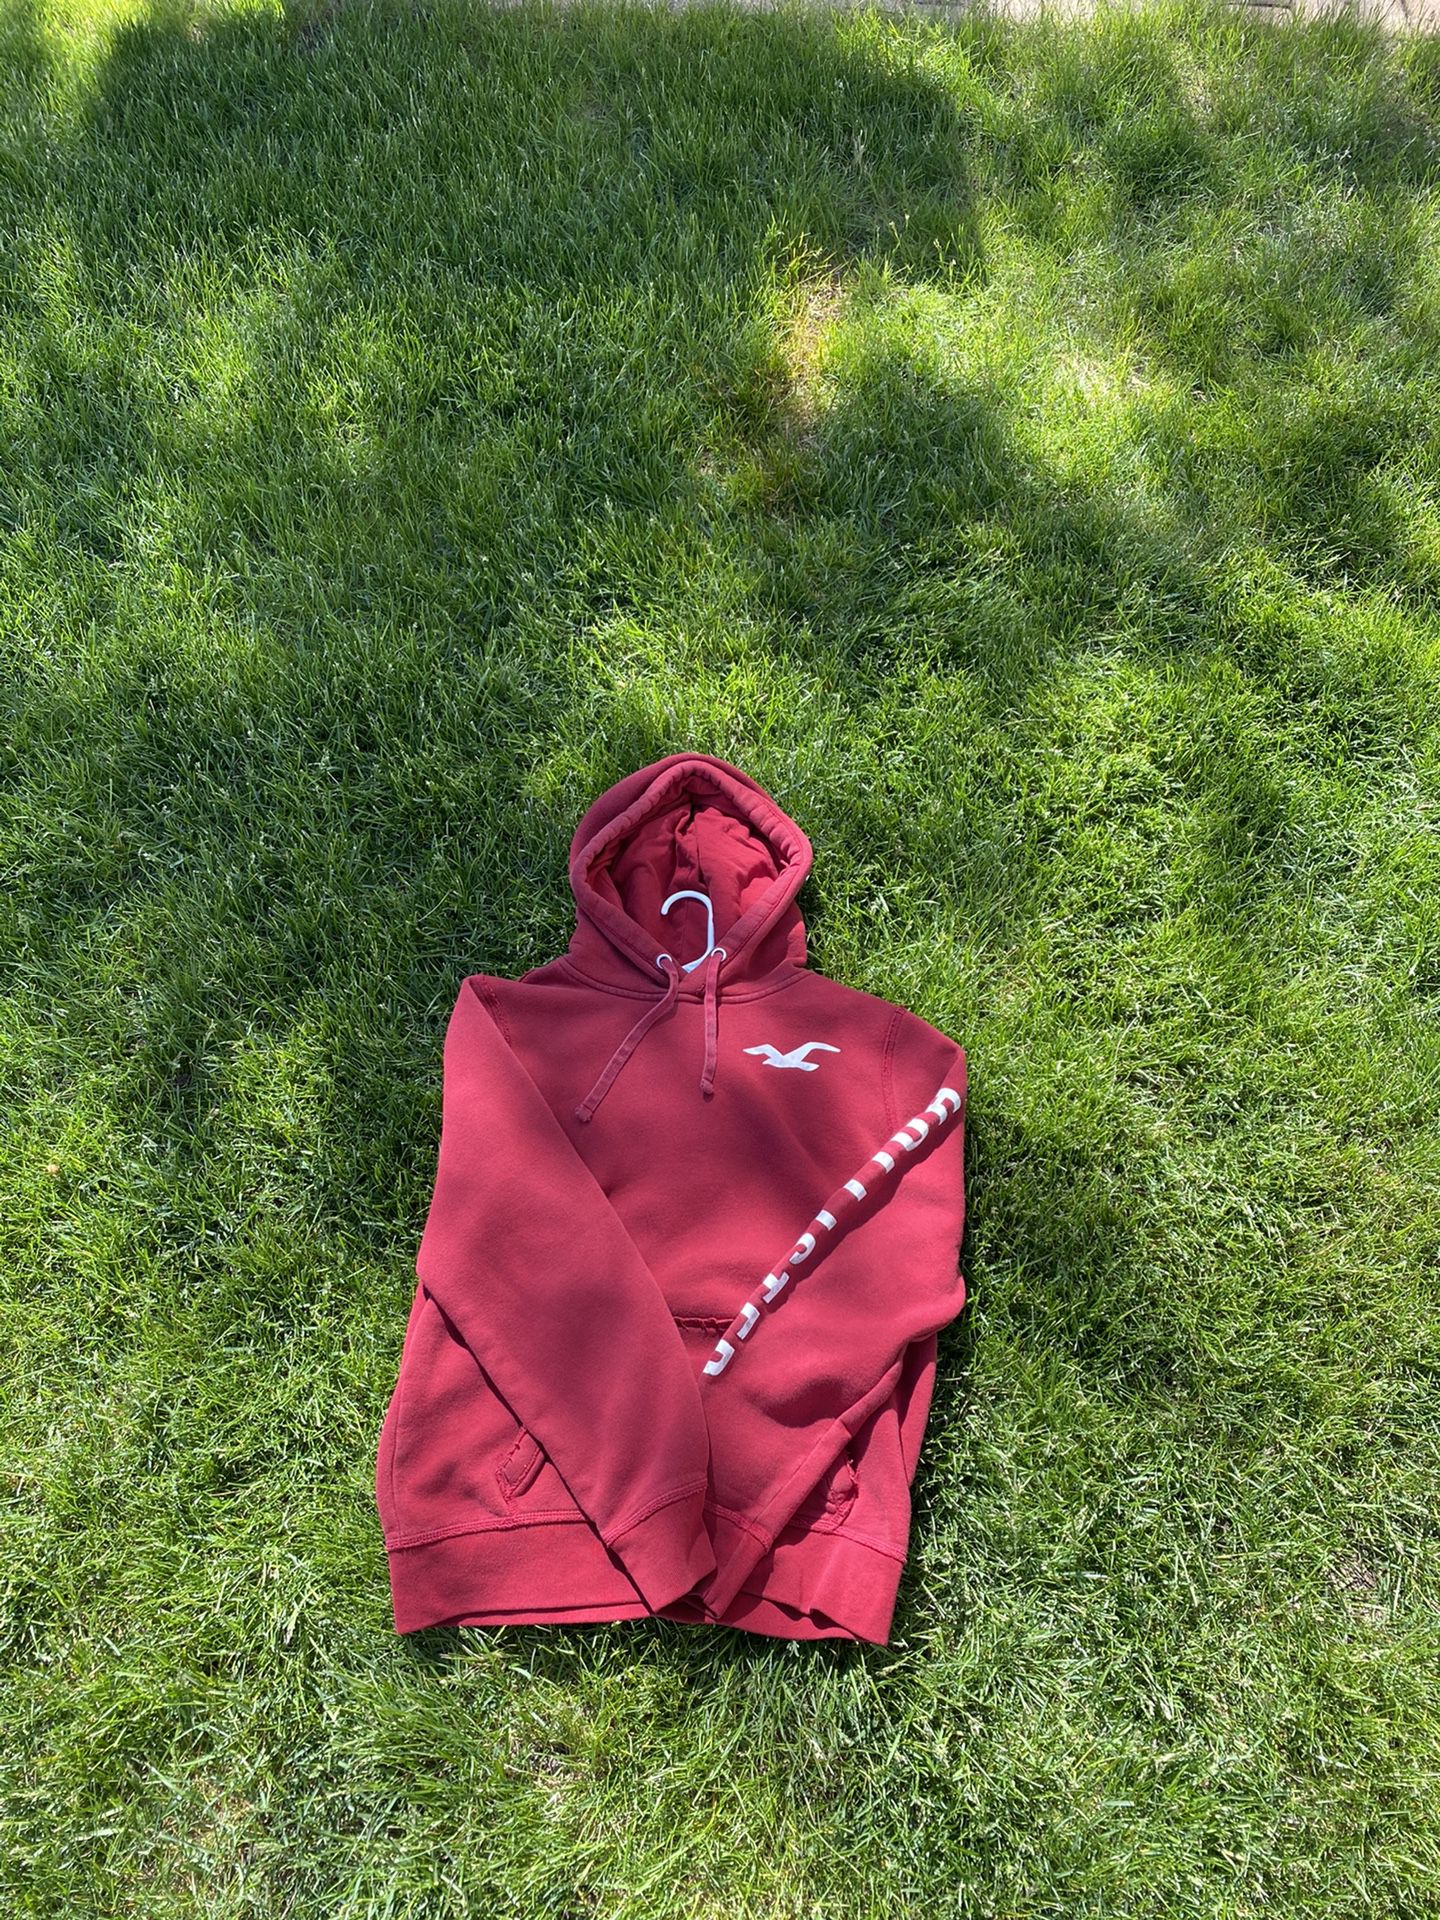 Hollister Hoodie Size M